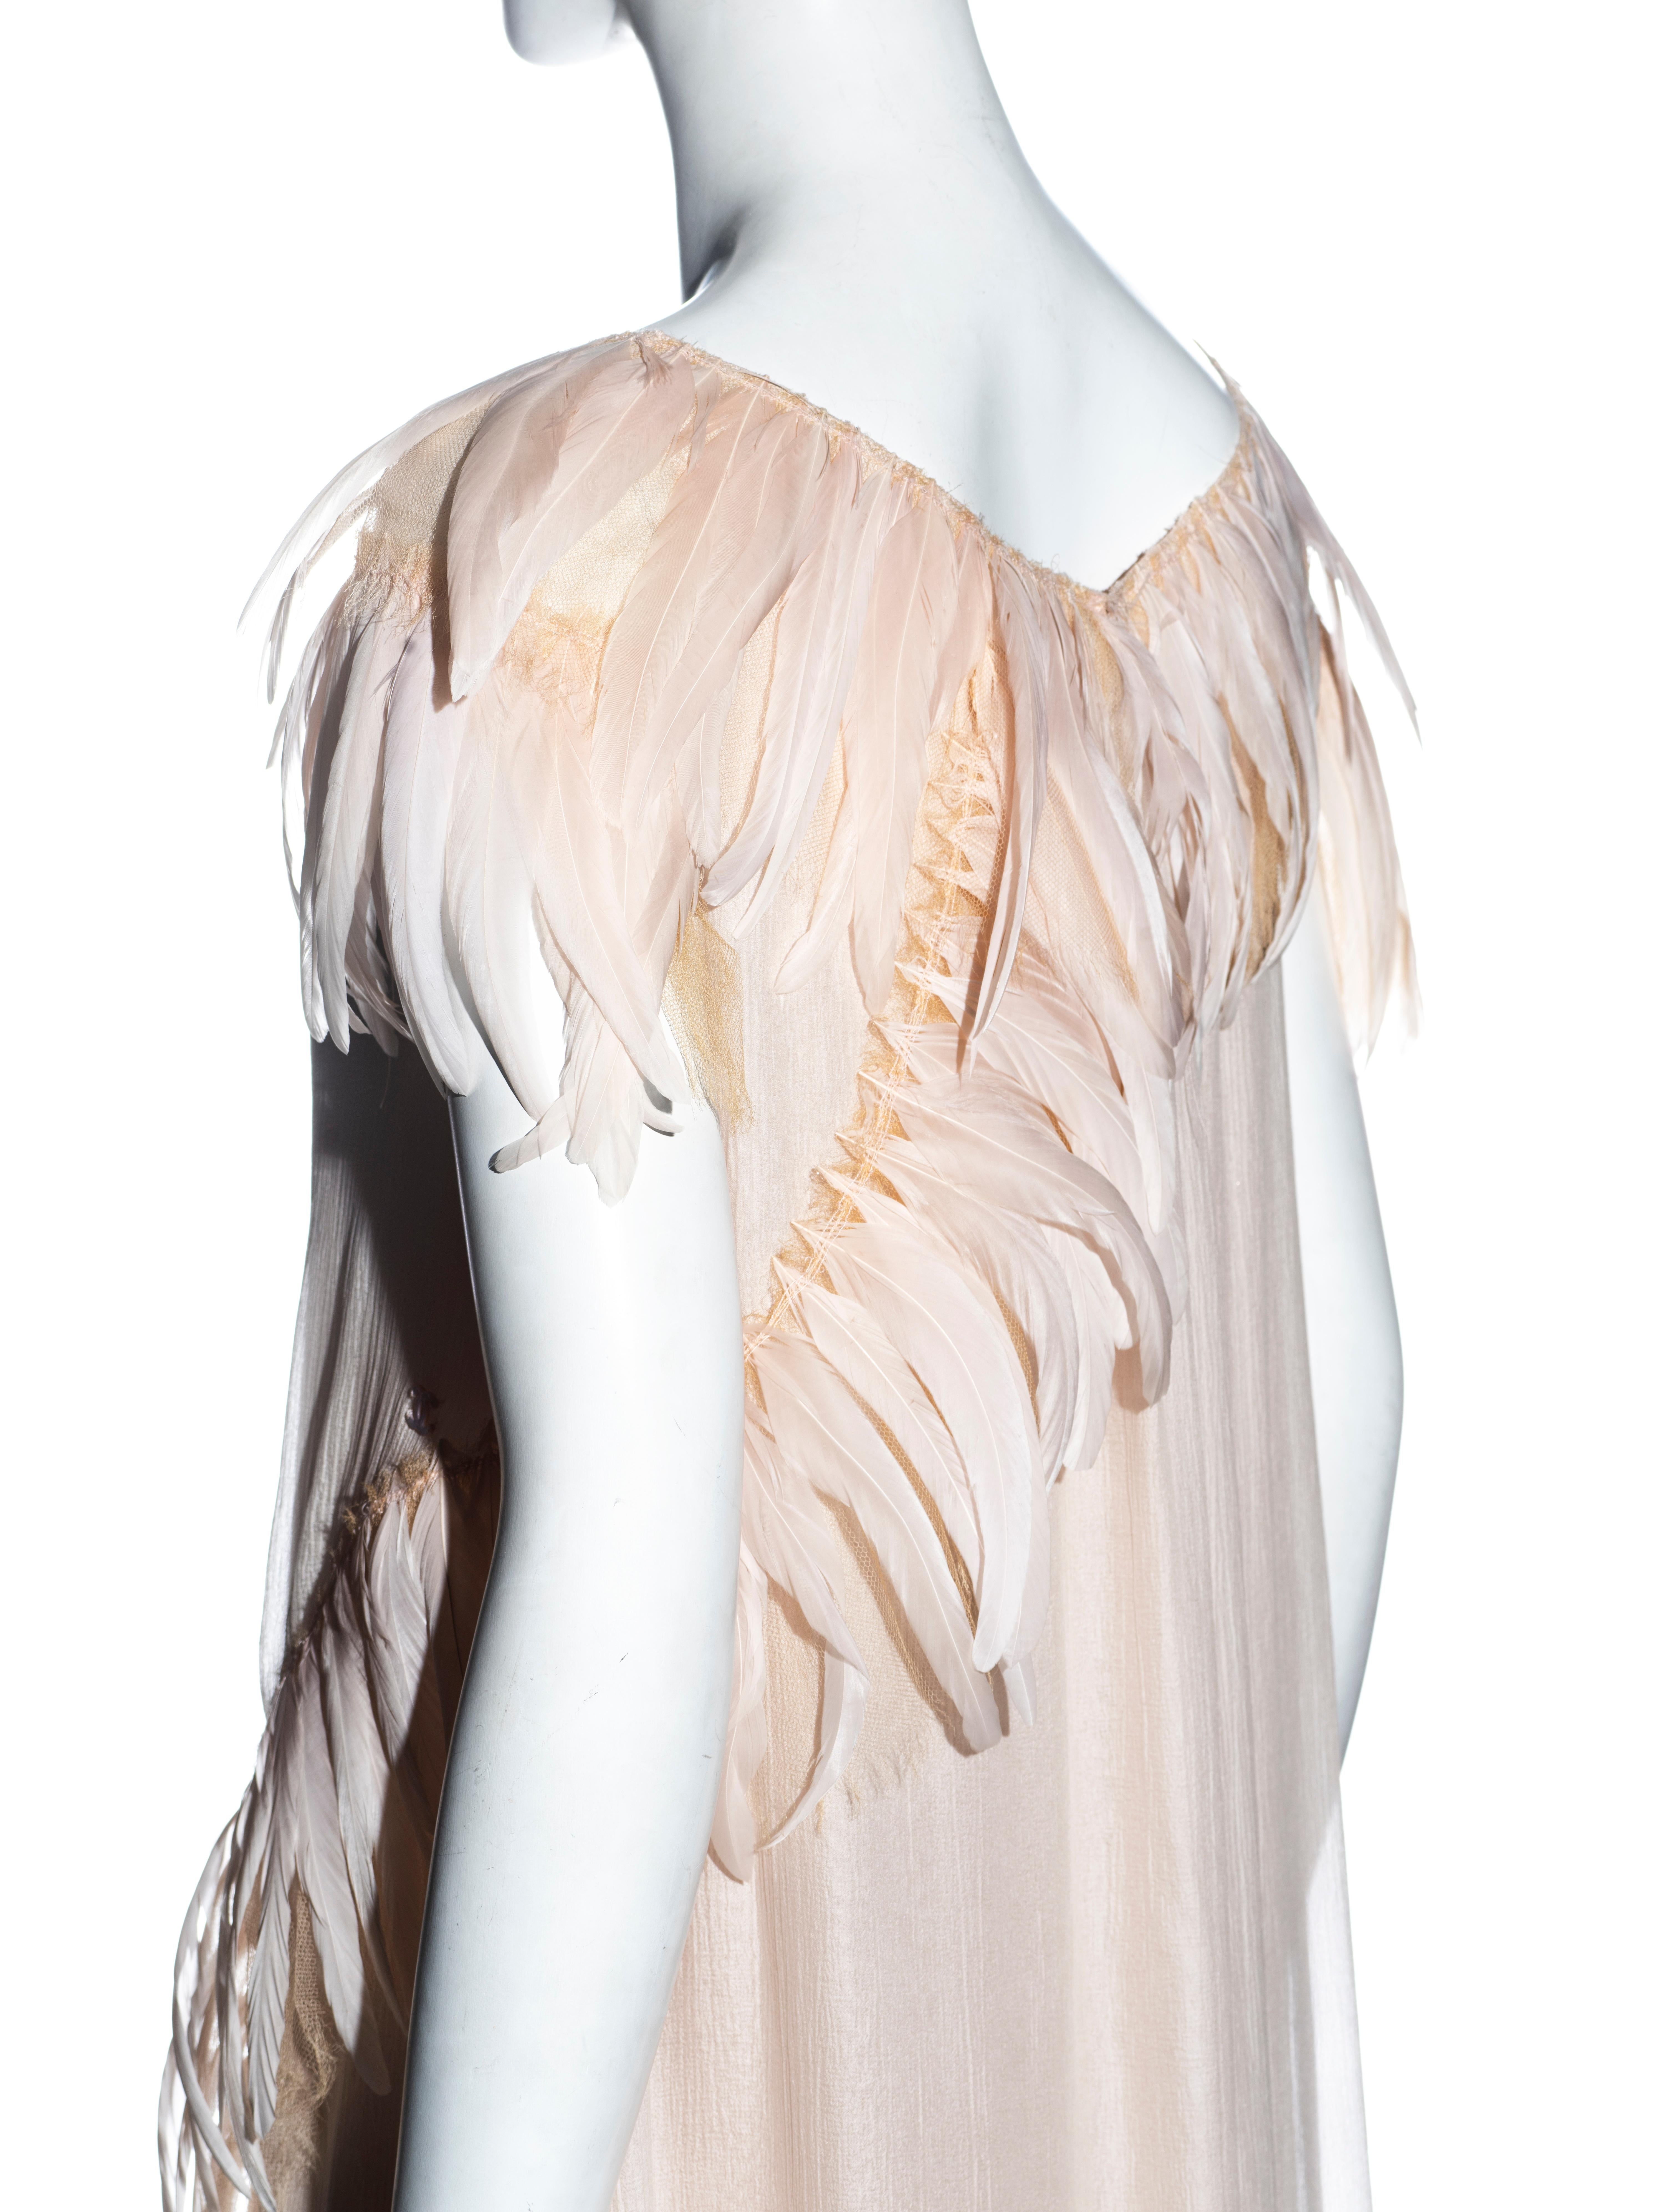 Chanel by Karl Lagerfeld silk chiffon evening dress with feathers, cr 2009 5